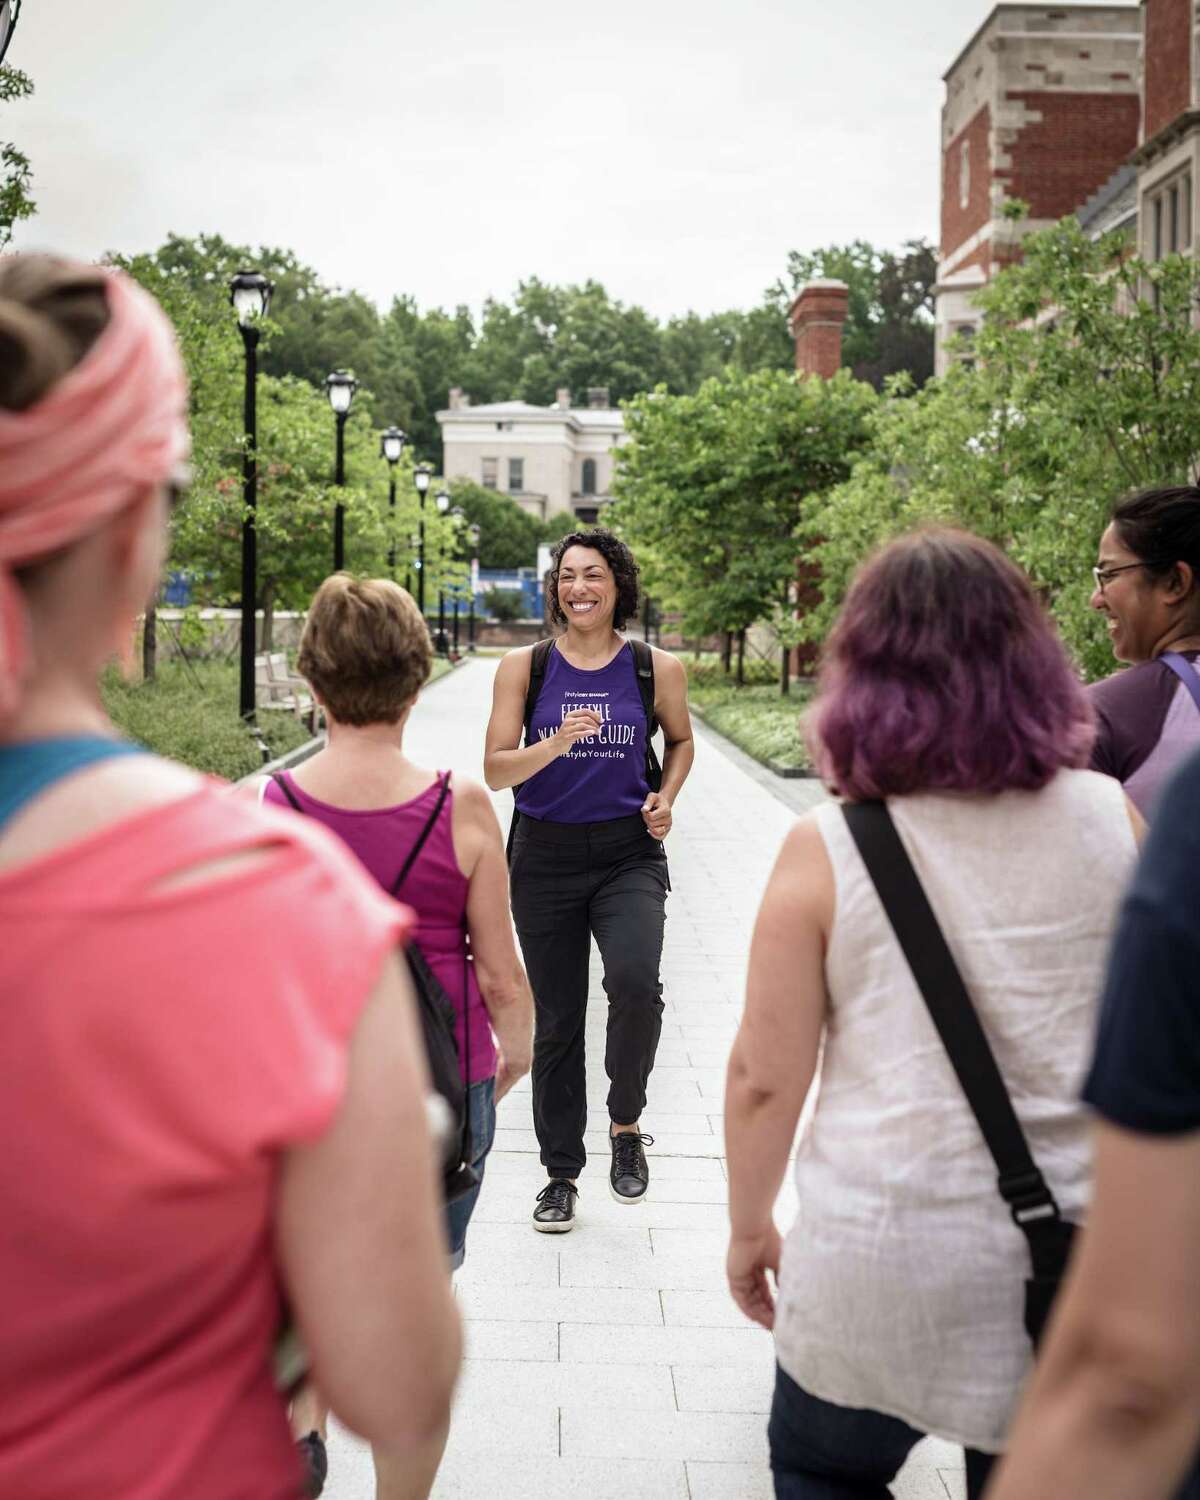 FITNESS TOUR: Shana Schneider, founder of the Fitstyle Your Life approach to fitness, will explore Morris Cove in New Haven on a briskly paced tour Saturday, June 29, at 9:30 a.m., (also Aug. 17 at 9:30 a.m. and a kids’ tour July 13). Rain dates for all Morris Cove walks are the following Sunday, at noon. Tickets are $10 and available at connect.fitstylebyshana.com/register/nhvmuseum.